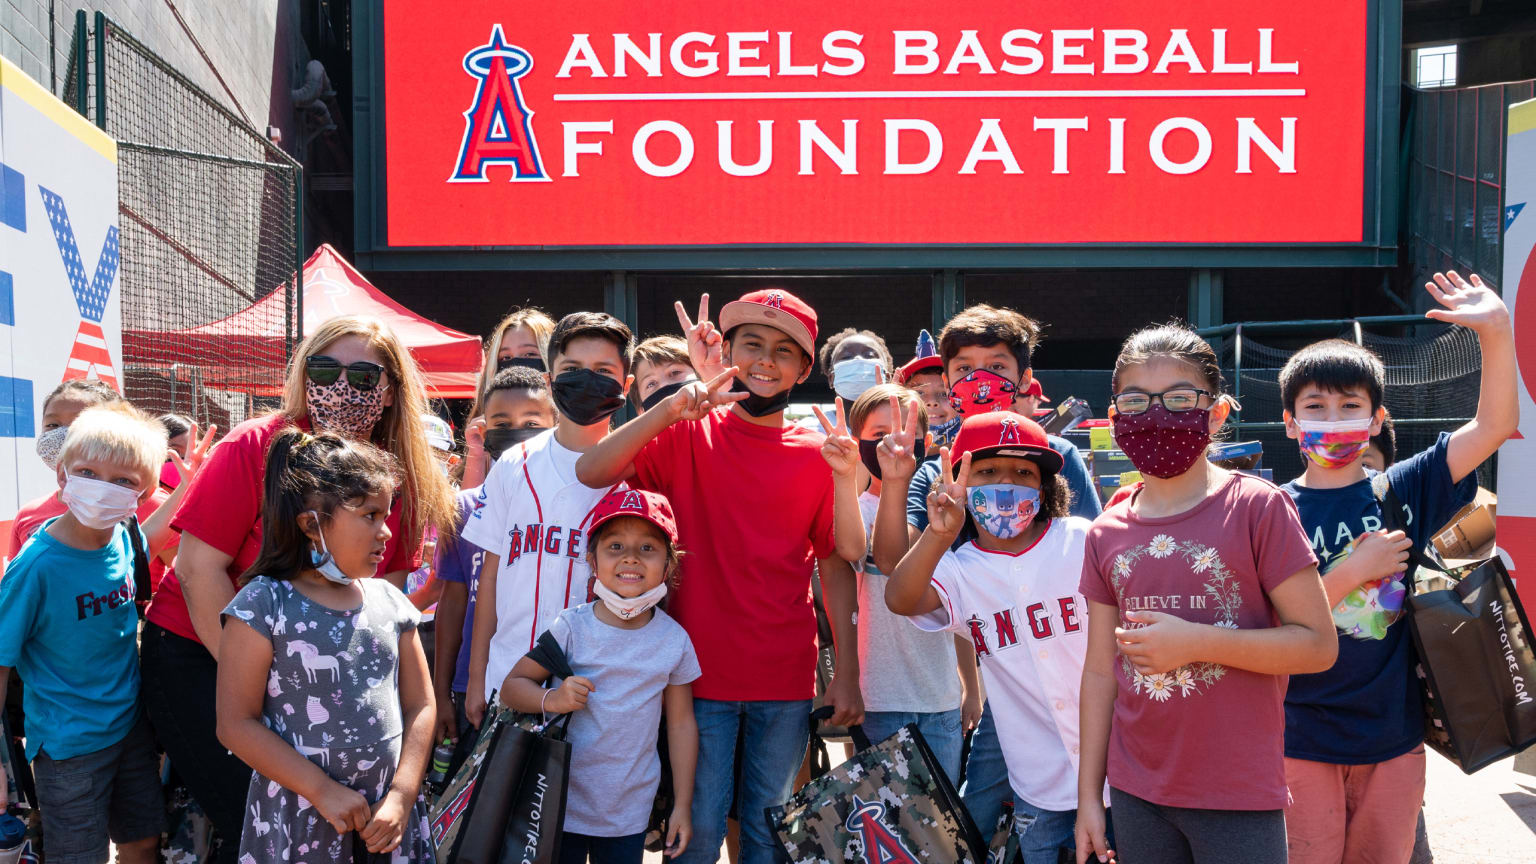 Angels in the Community